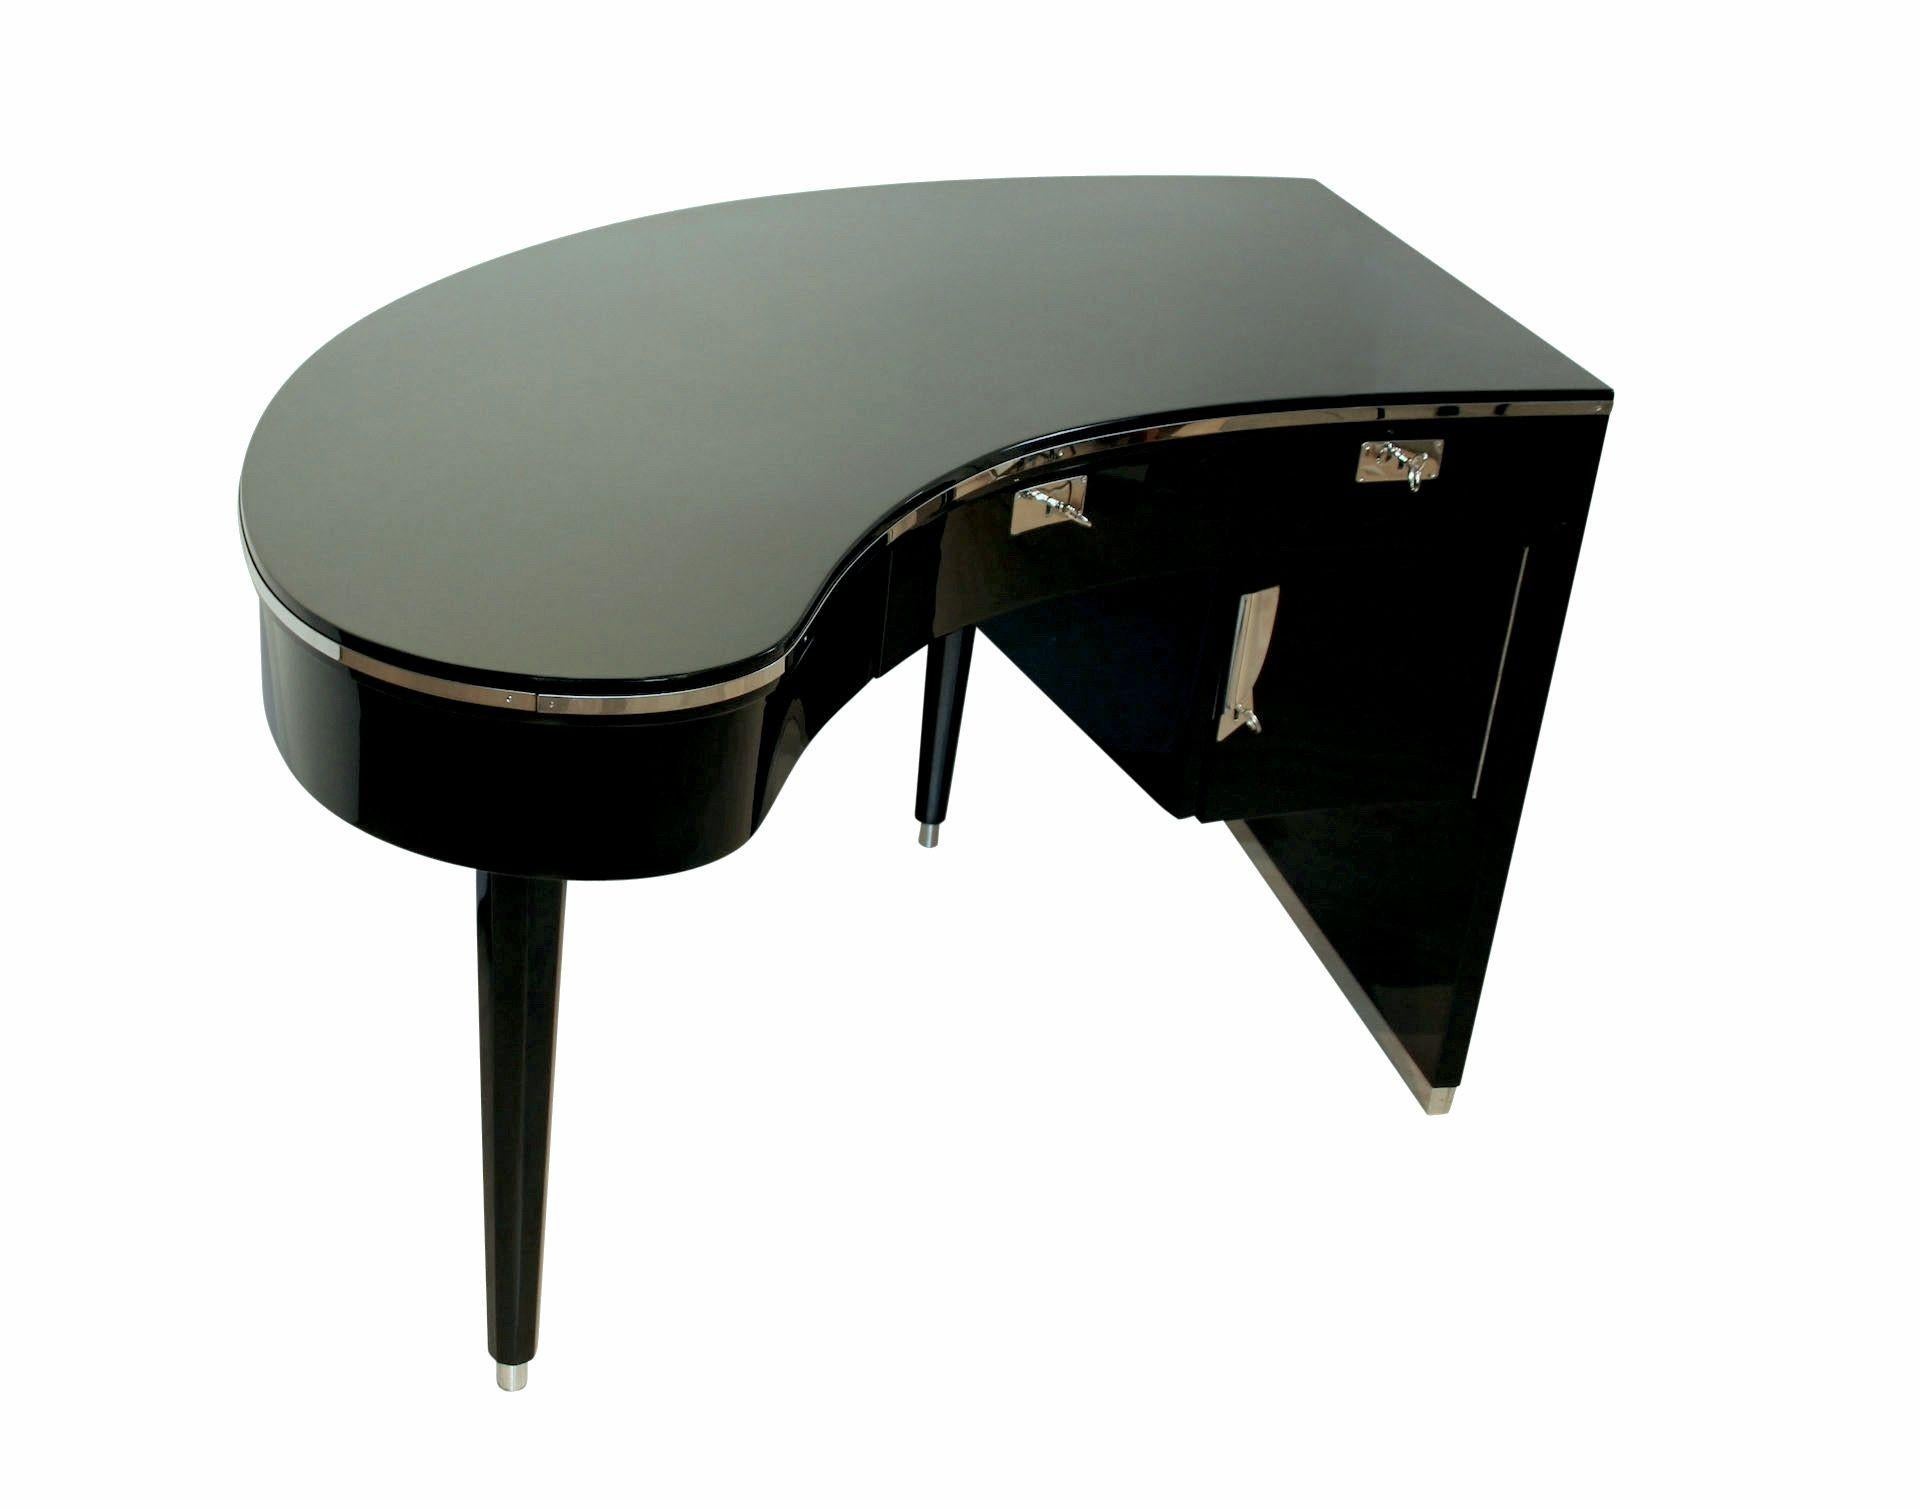 Art Deco Design Desk, Curved Top, Piano Lacquer, Chrome, France, 1950s For Sale